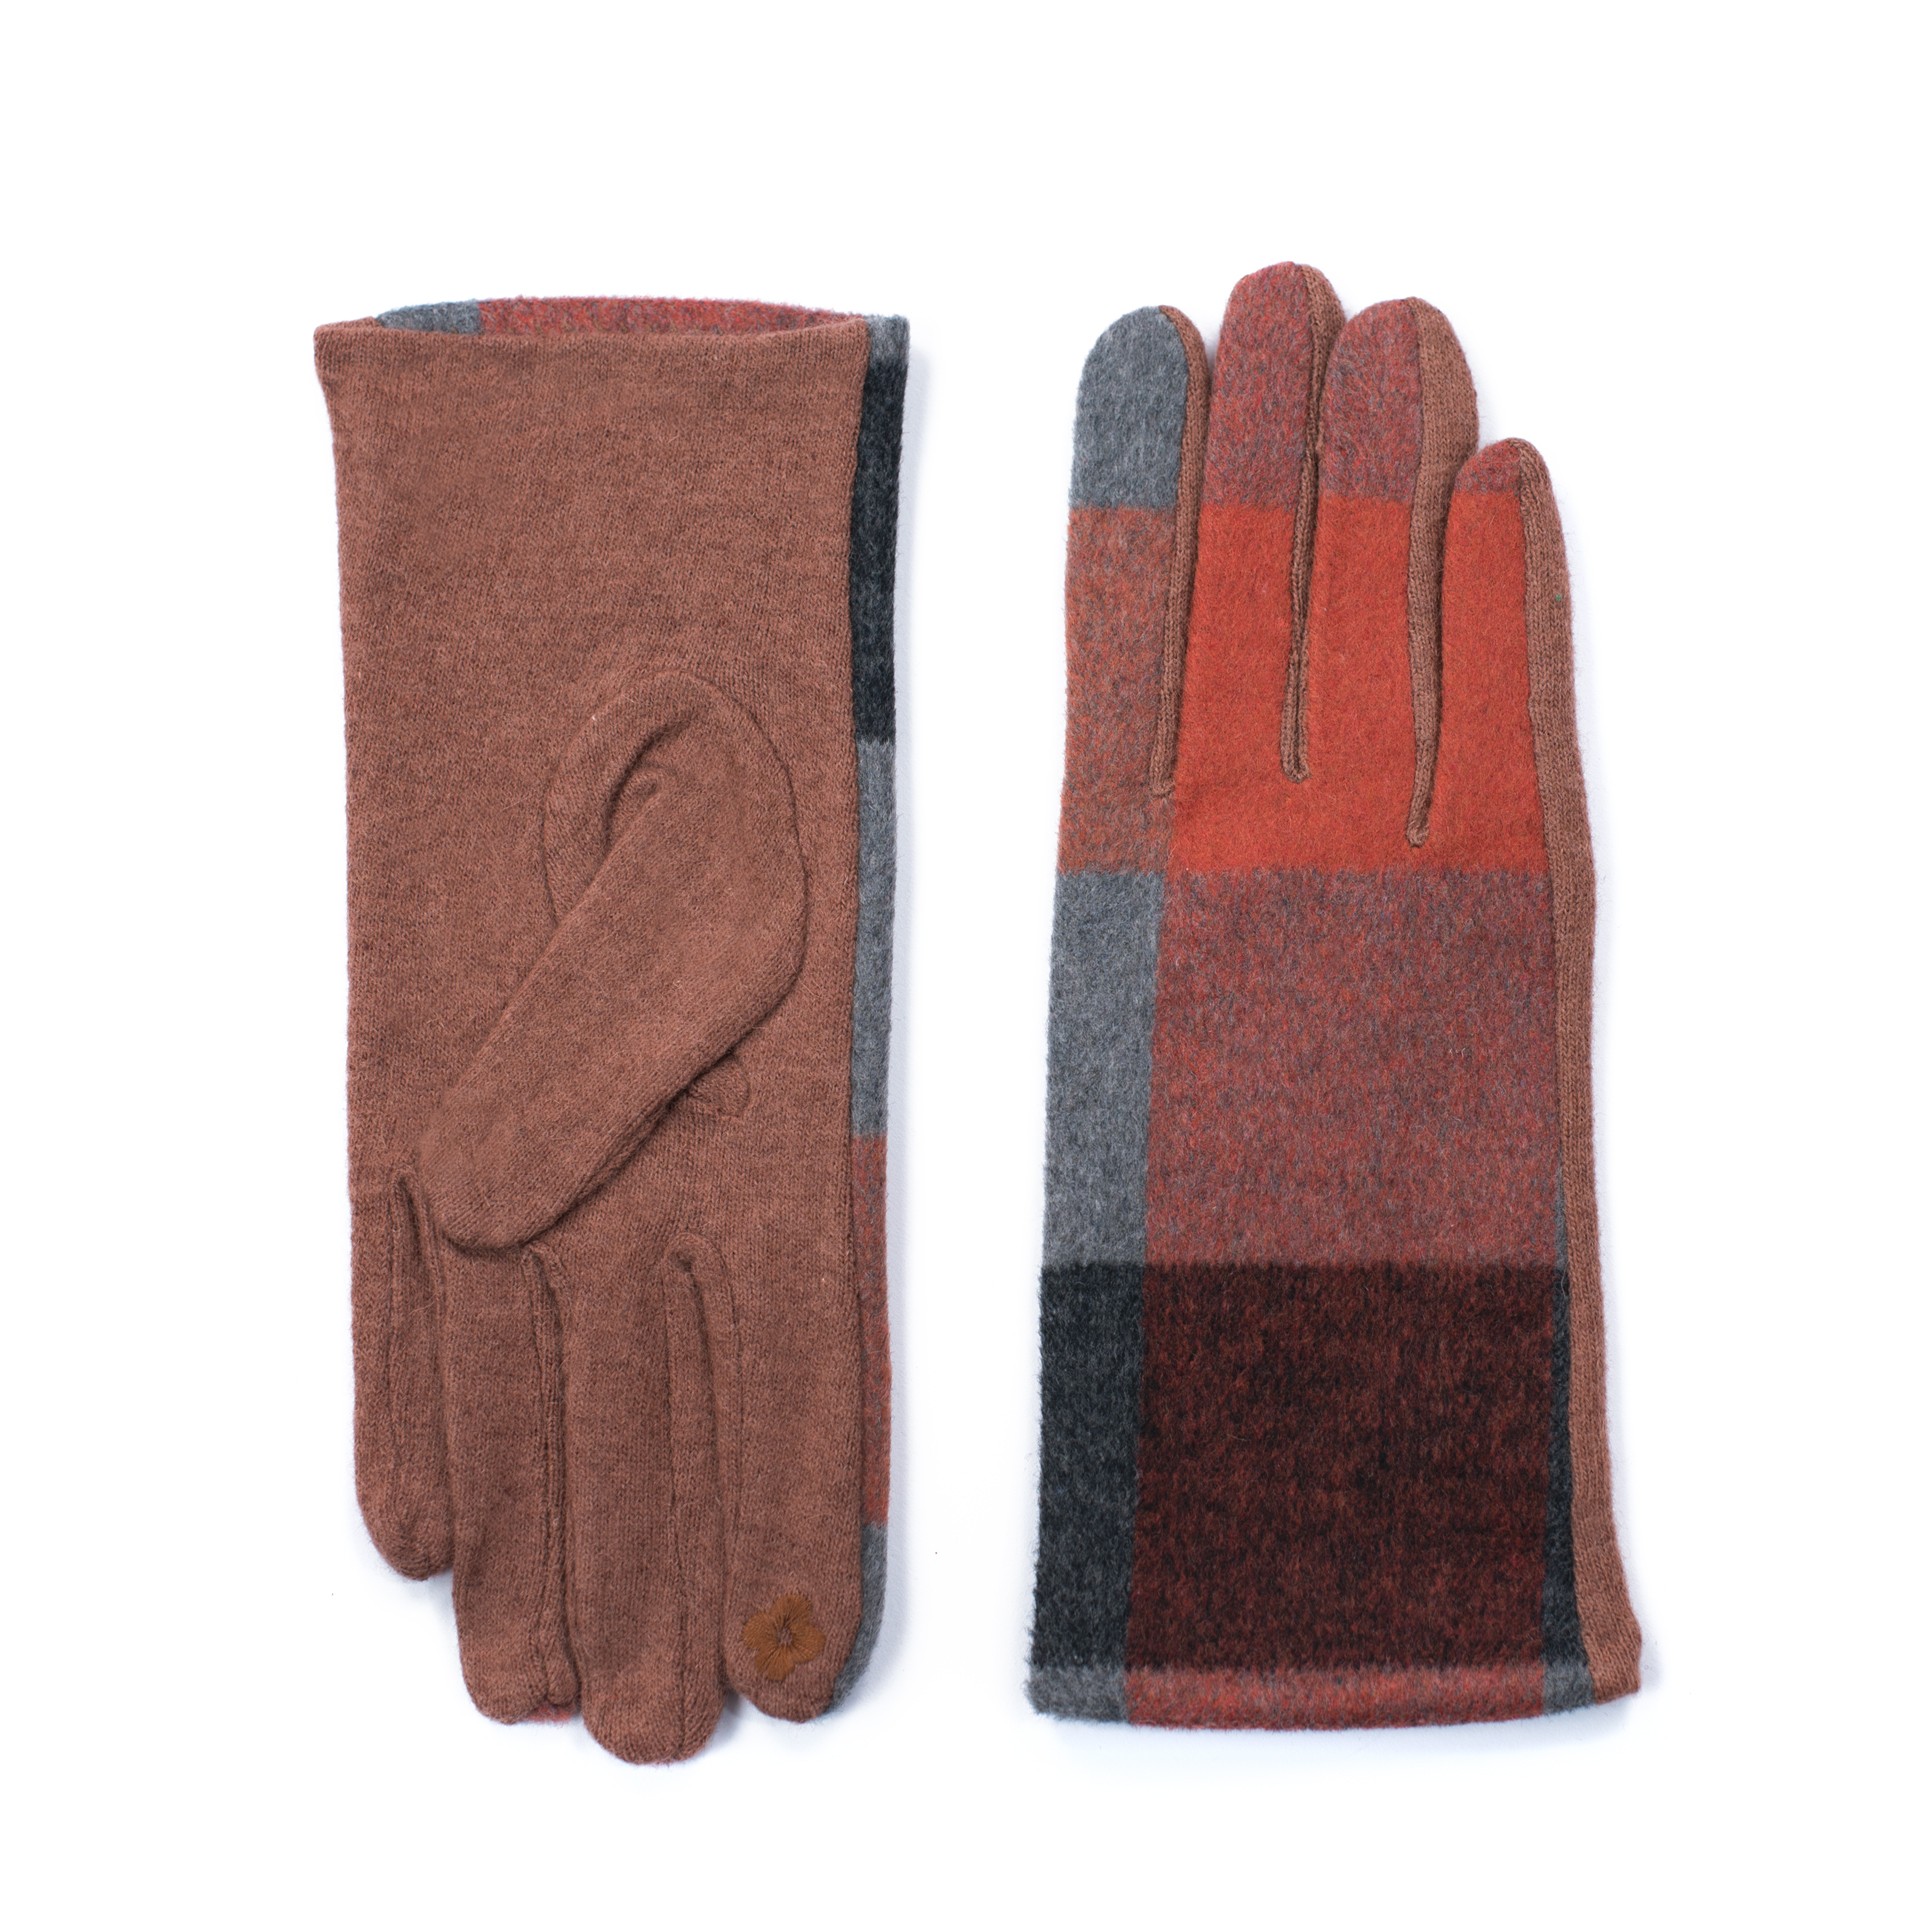 Art Of Polo Woman's Gloves rk19552